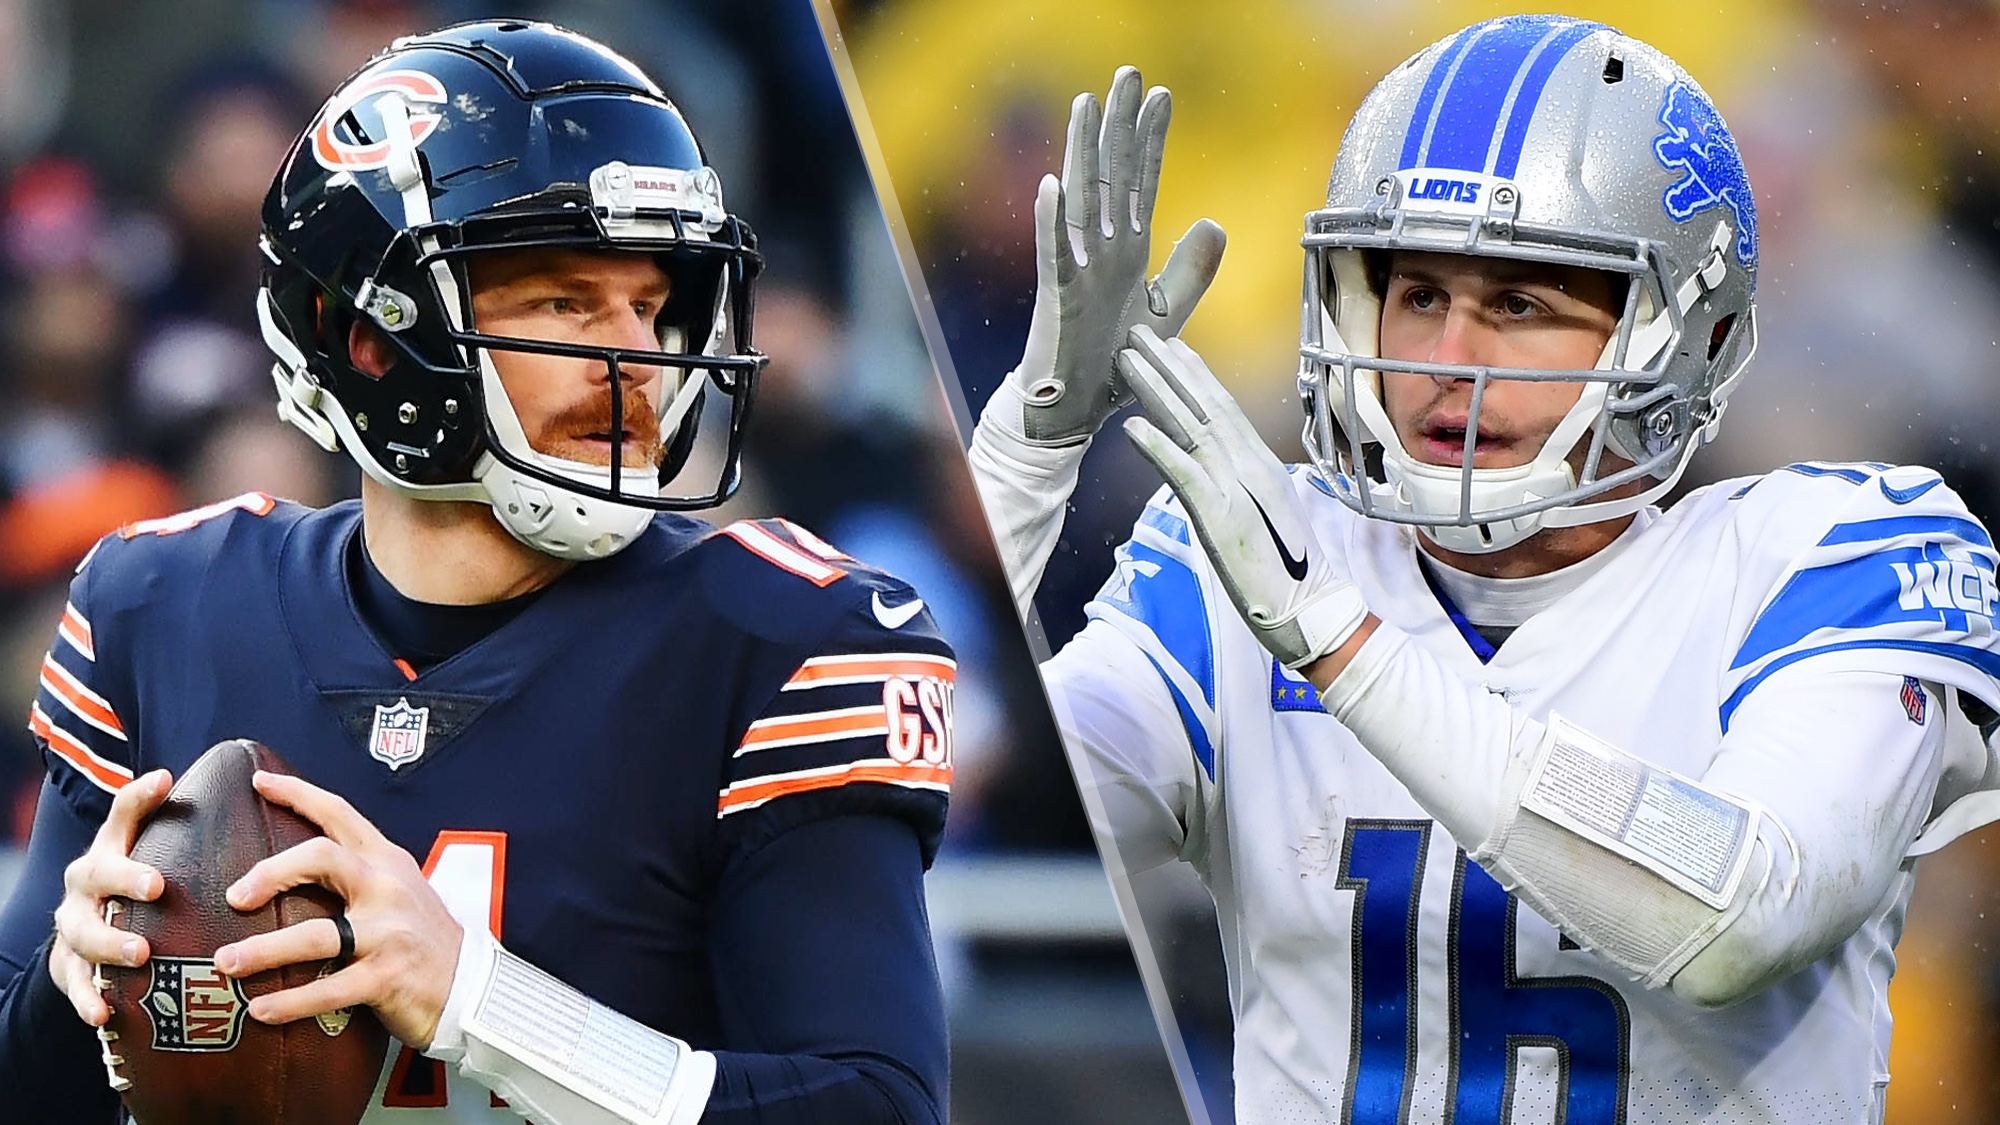 Bears vs Lions live stream is today: How to watch NFL Thanksgiving game,  odds and fantasy picks